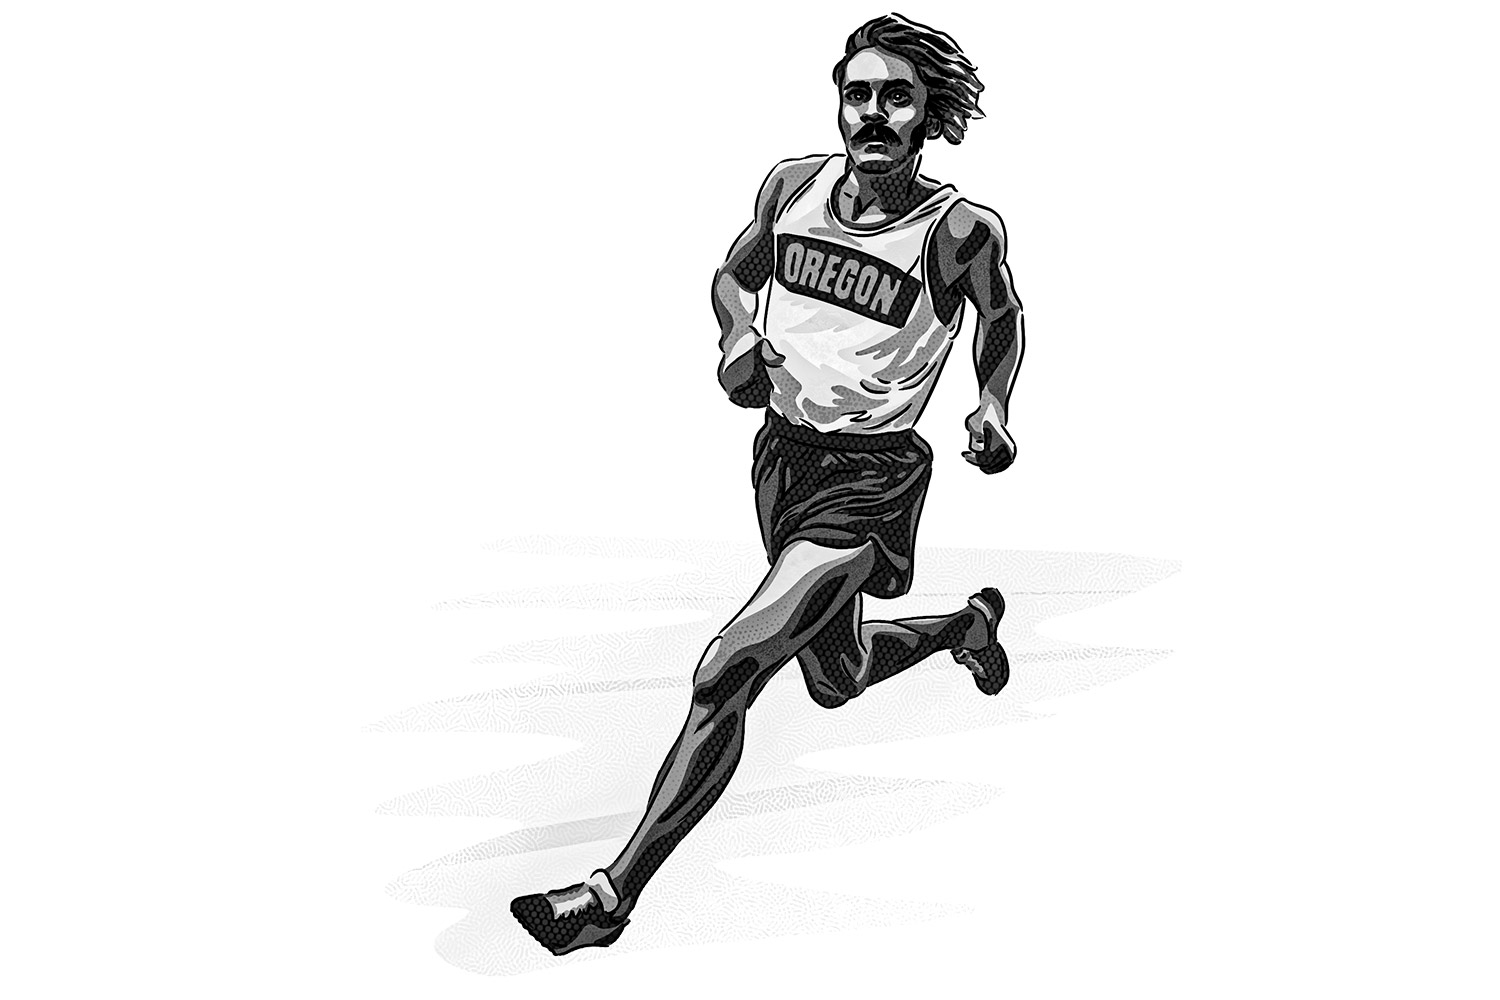 Prefontaine Classic Eugene Weekly